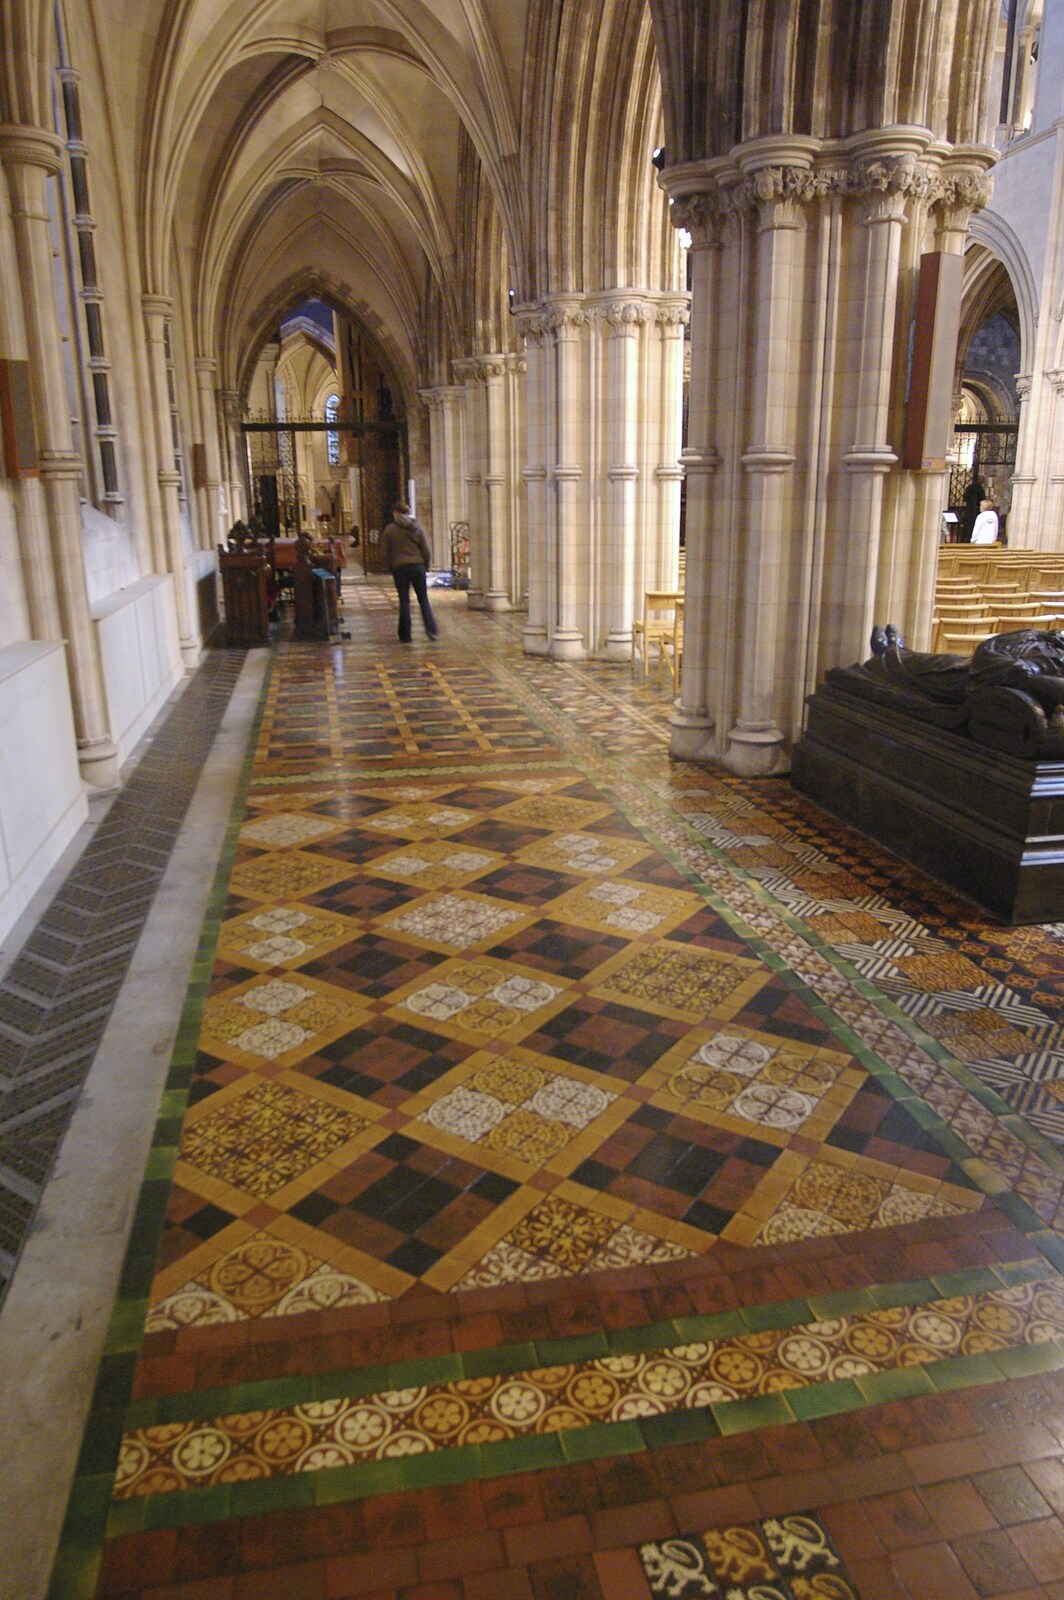 Blackrock and Dublin, Ireland - 24th September 2007: Nicely tiled floor in the cathedral